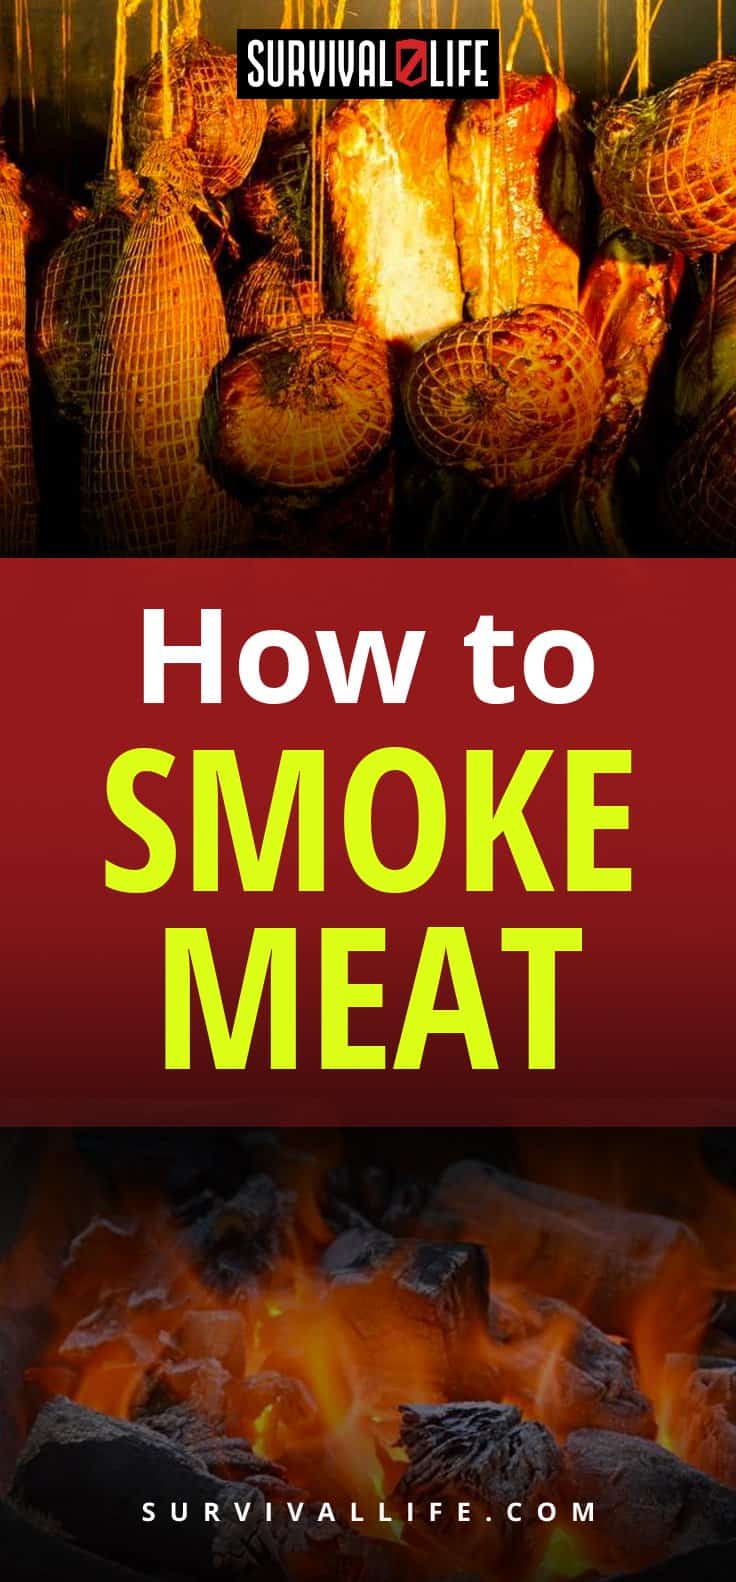 How To Smoke Meat